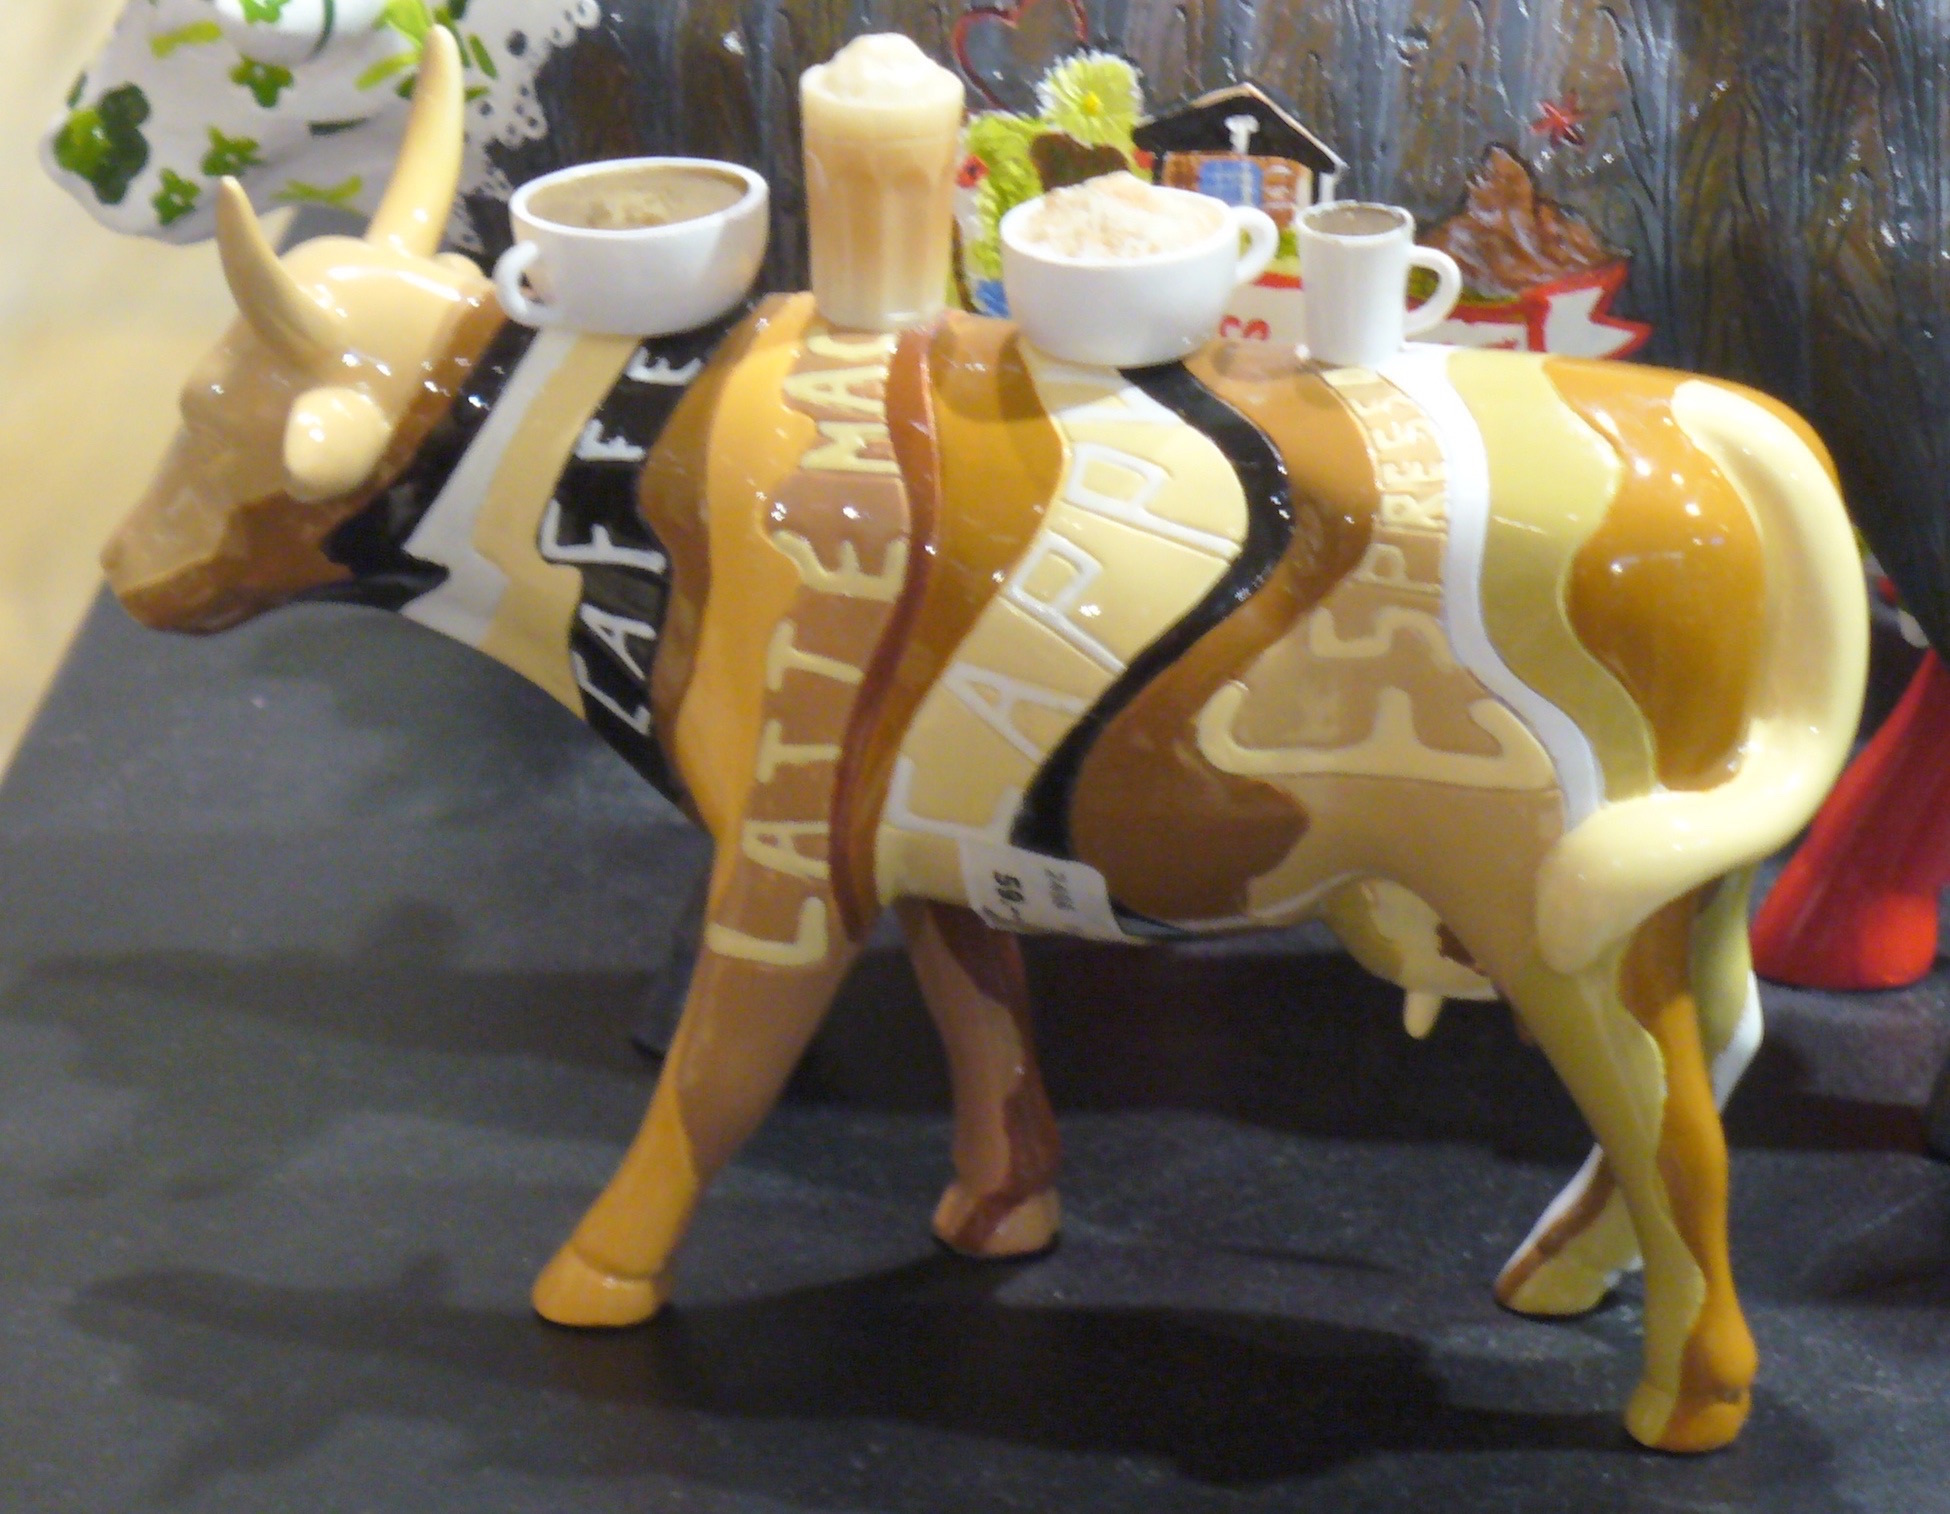 The Coffee Cow